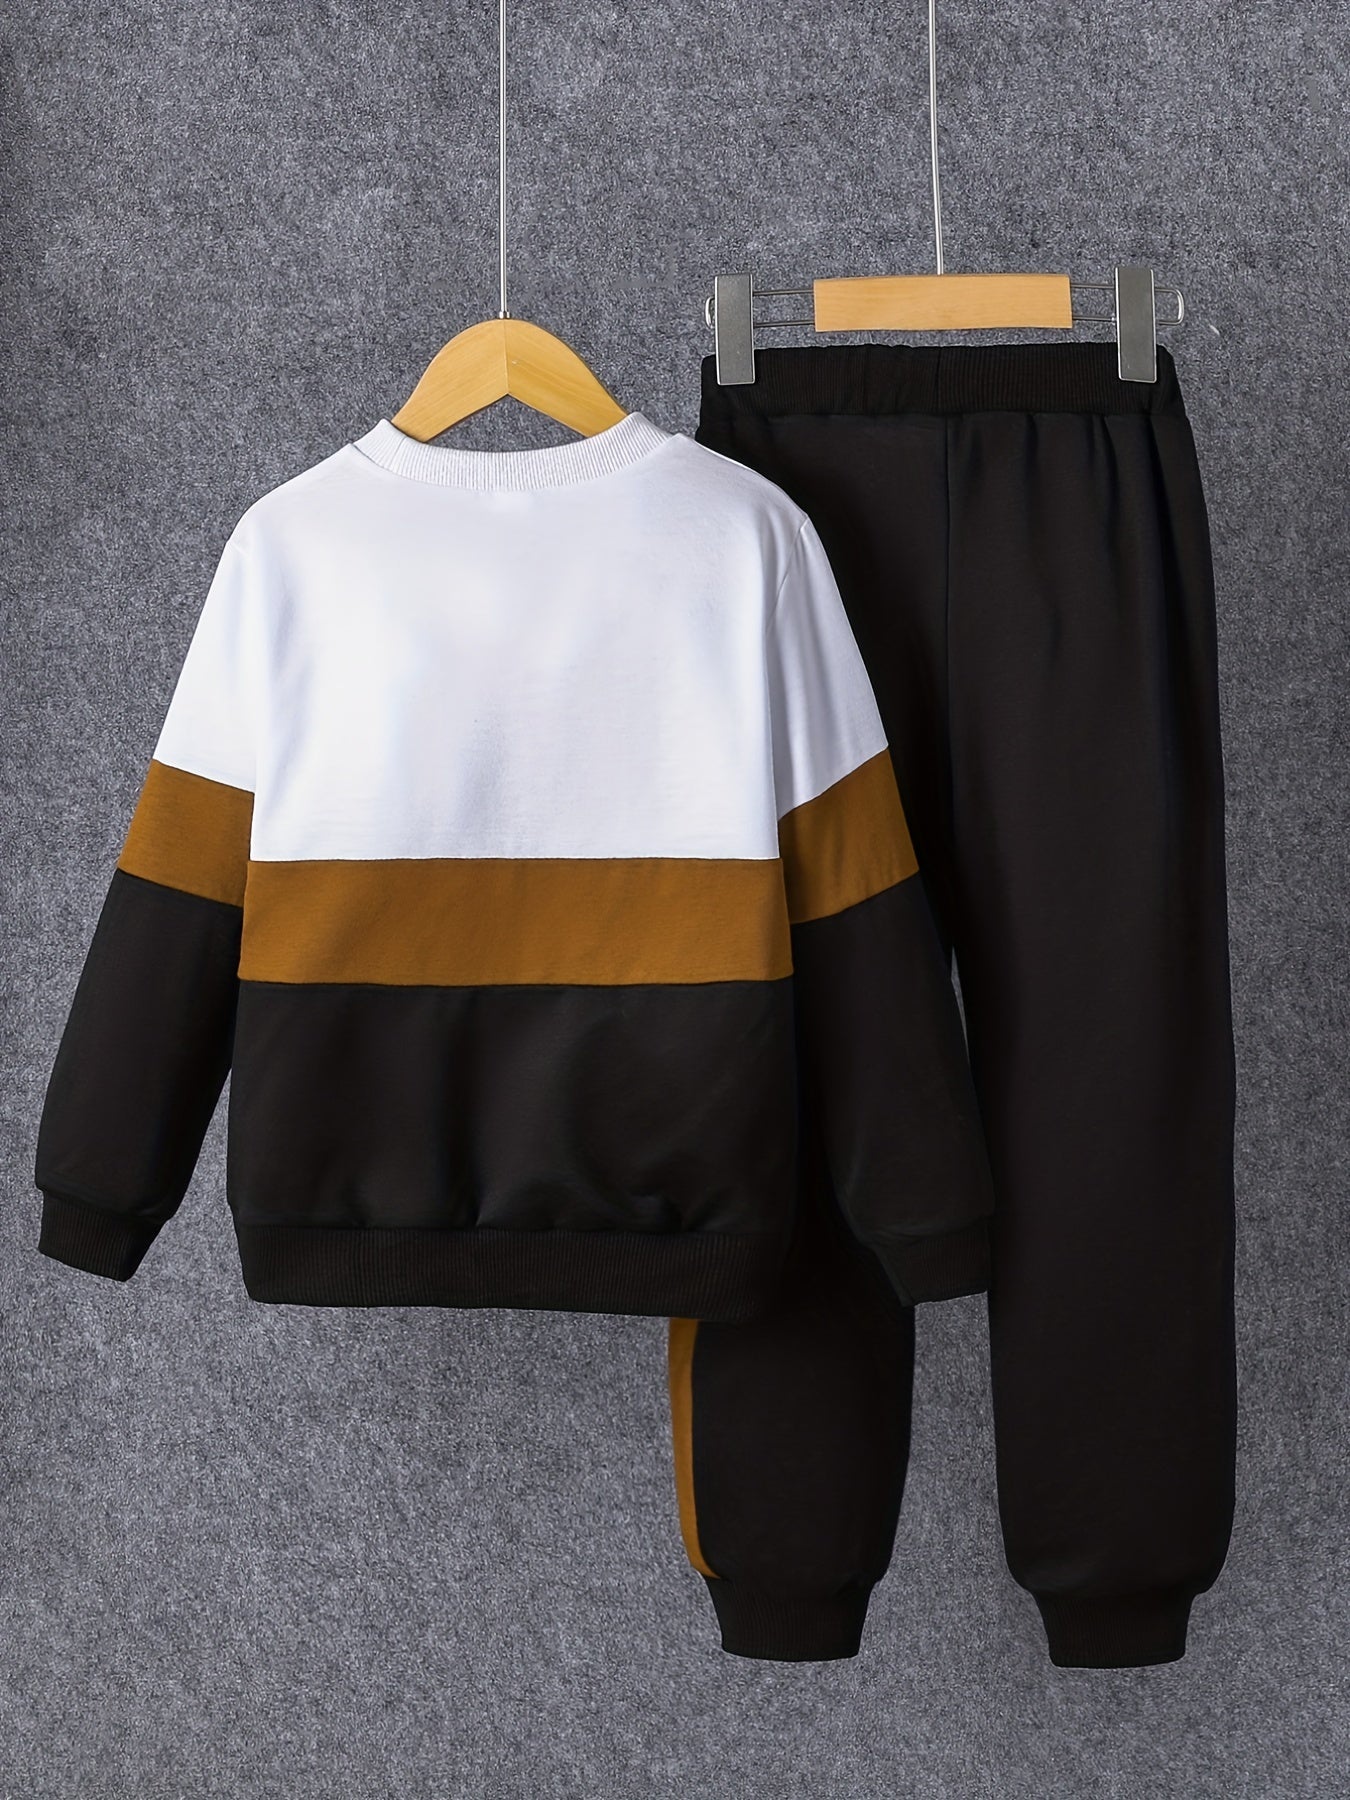 Boy's Color Clash 2pcs, Sweatshirt & Sweatpants Set, KING Print Long Sleeve Top, Casual Outfits, Kids Clothes For Spring Fall